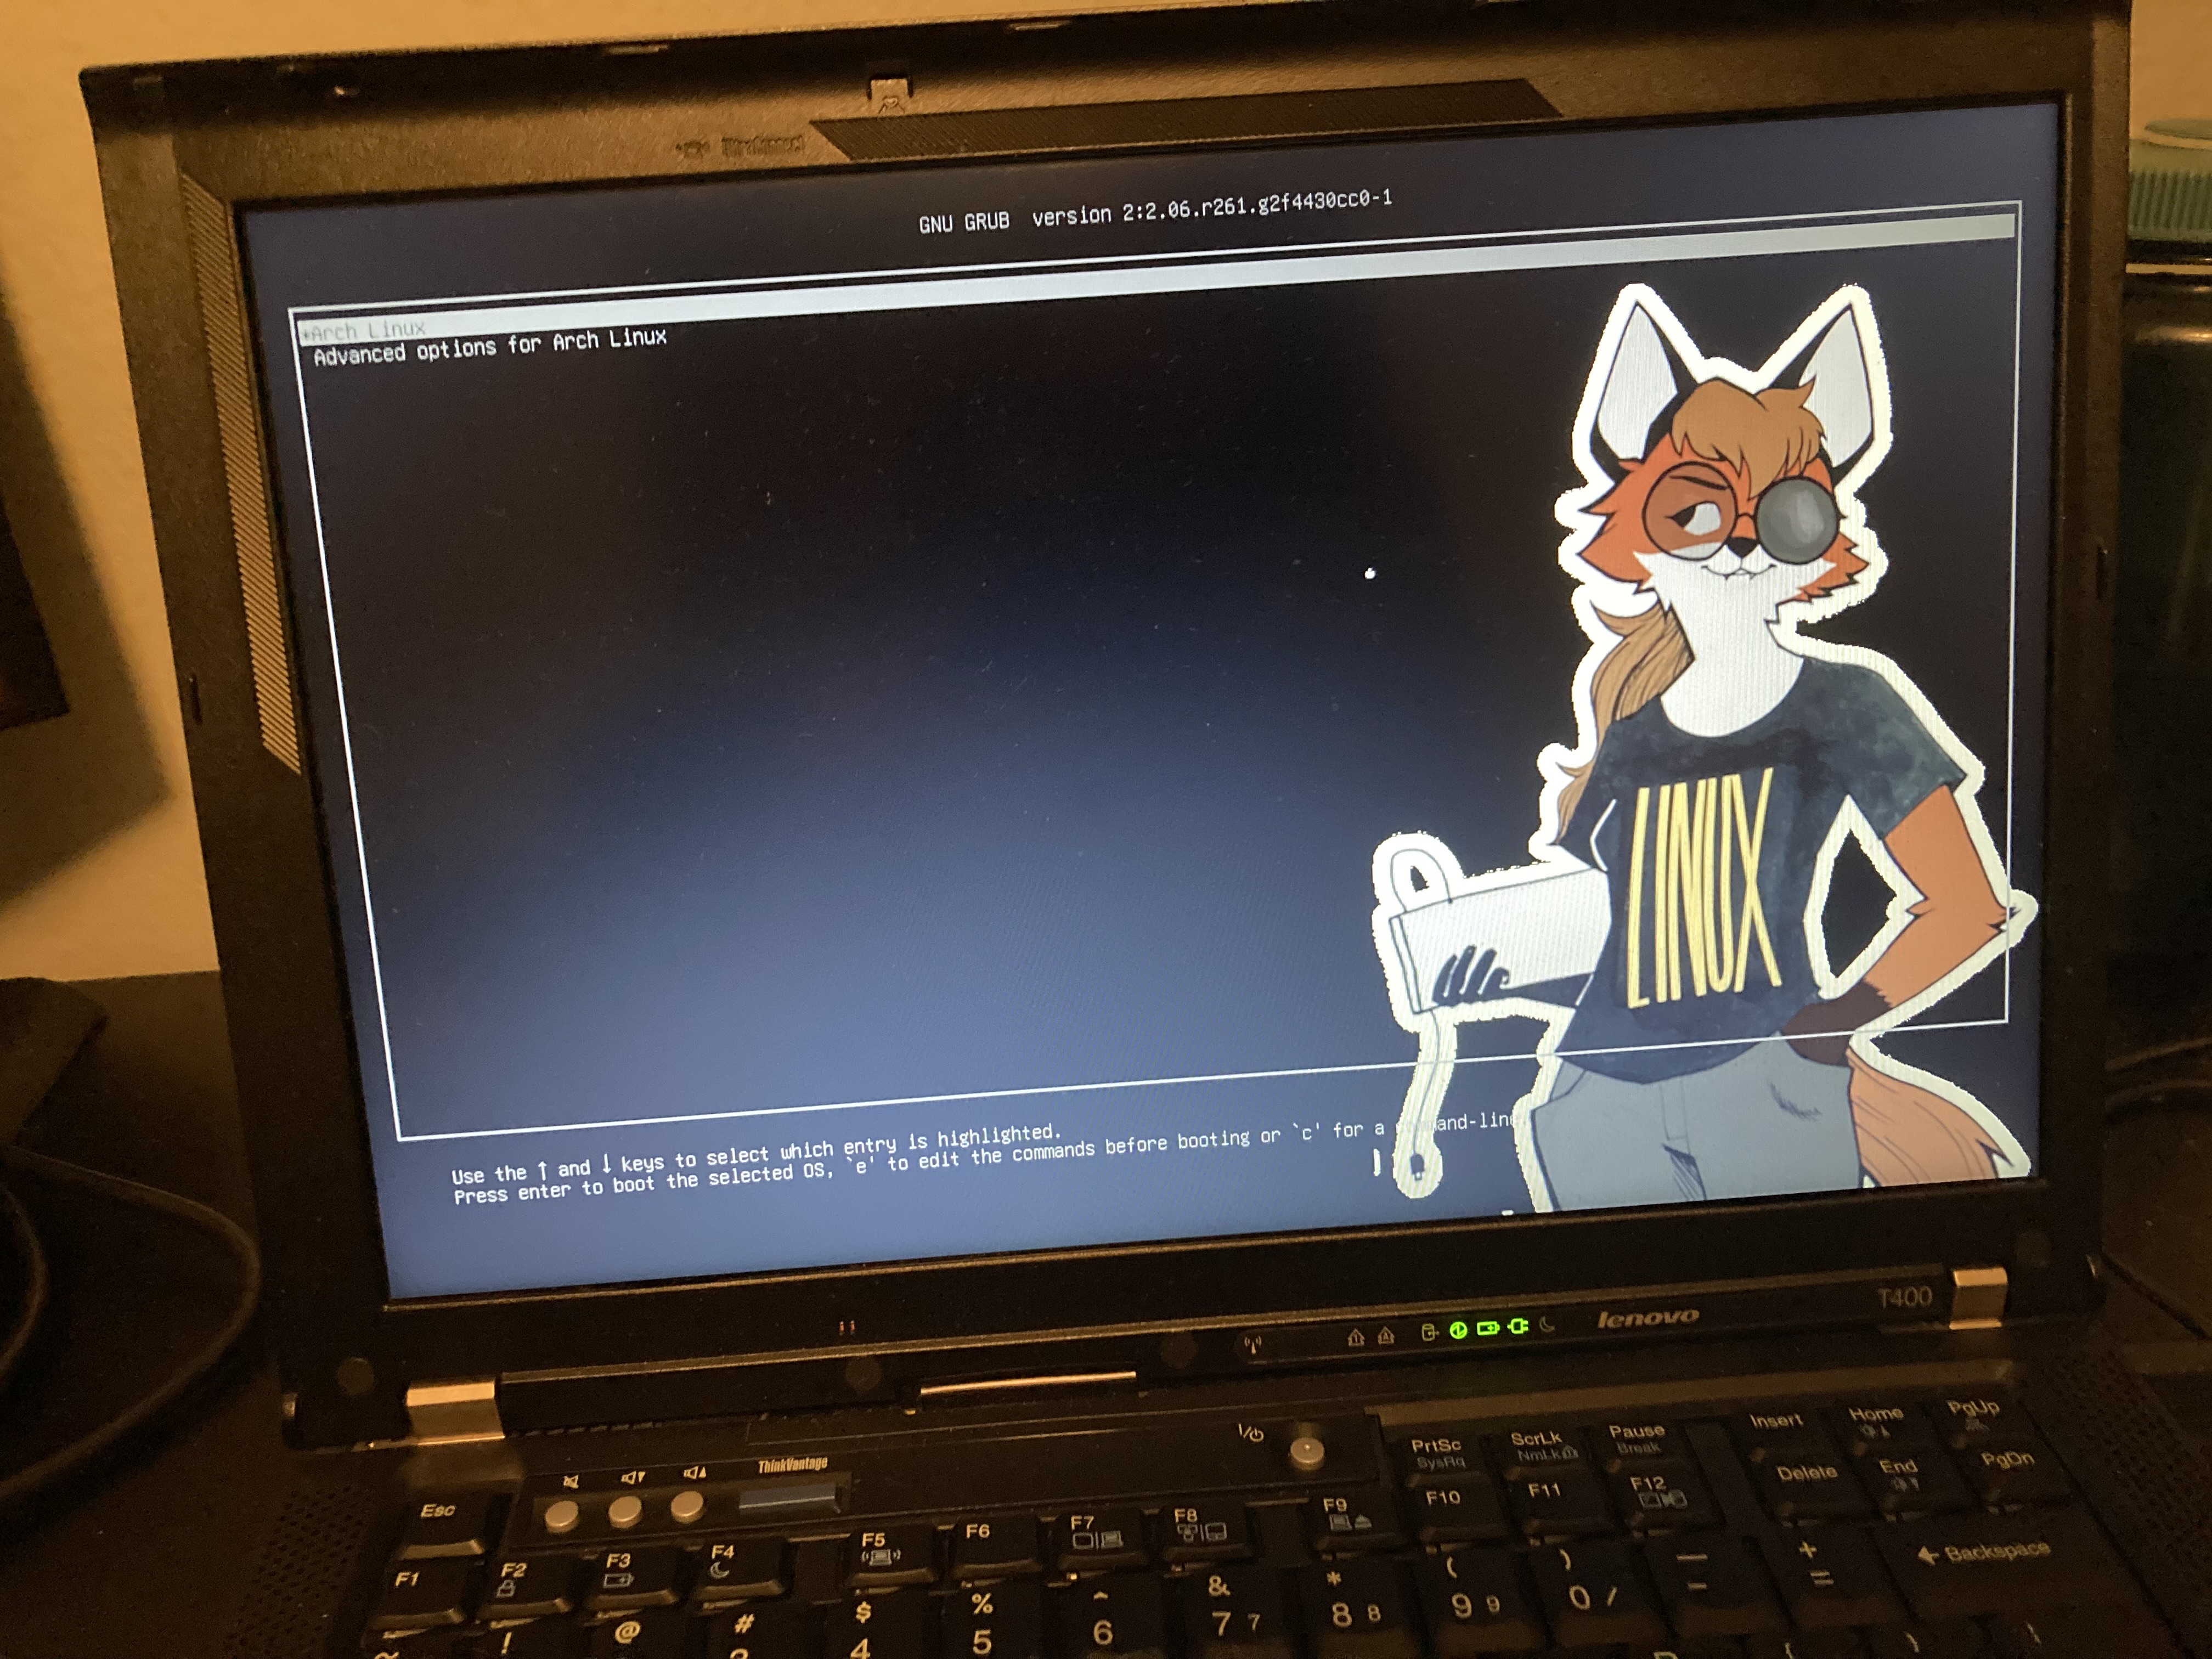 a thinkpad t400 displaying gnu grub with xenia, a foxgirl in a shirt that says LINUX on it, displayed as a splash screen